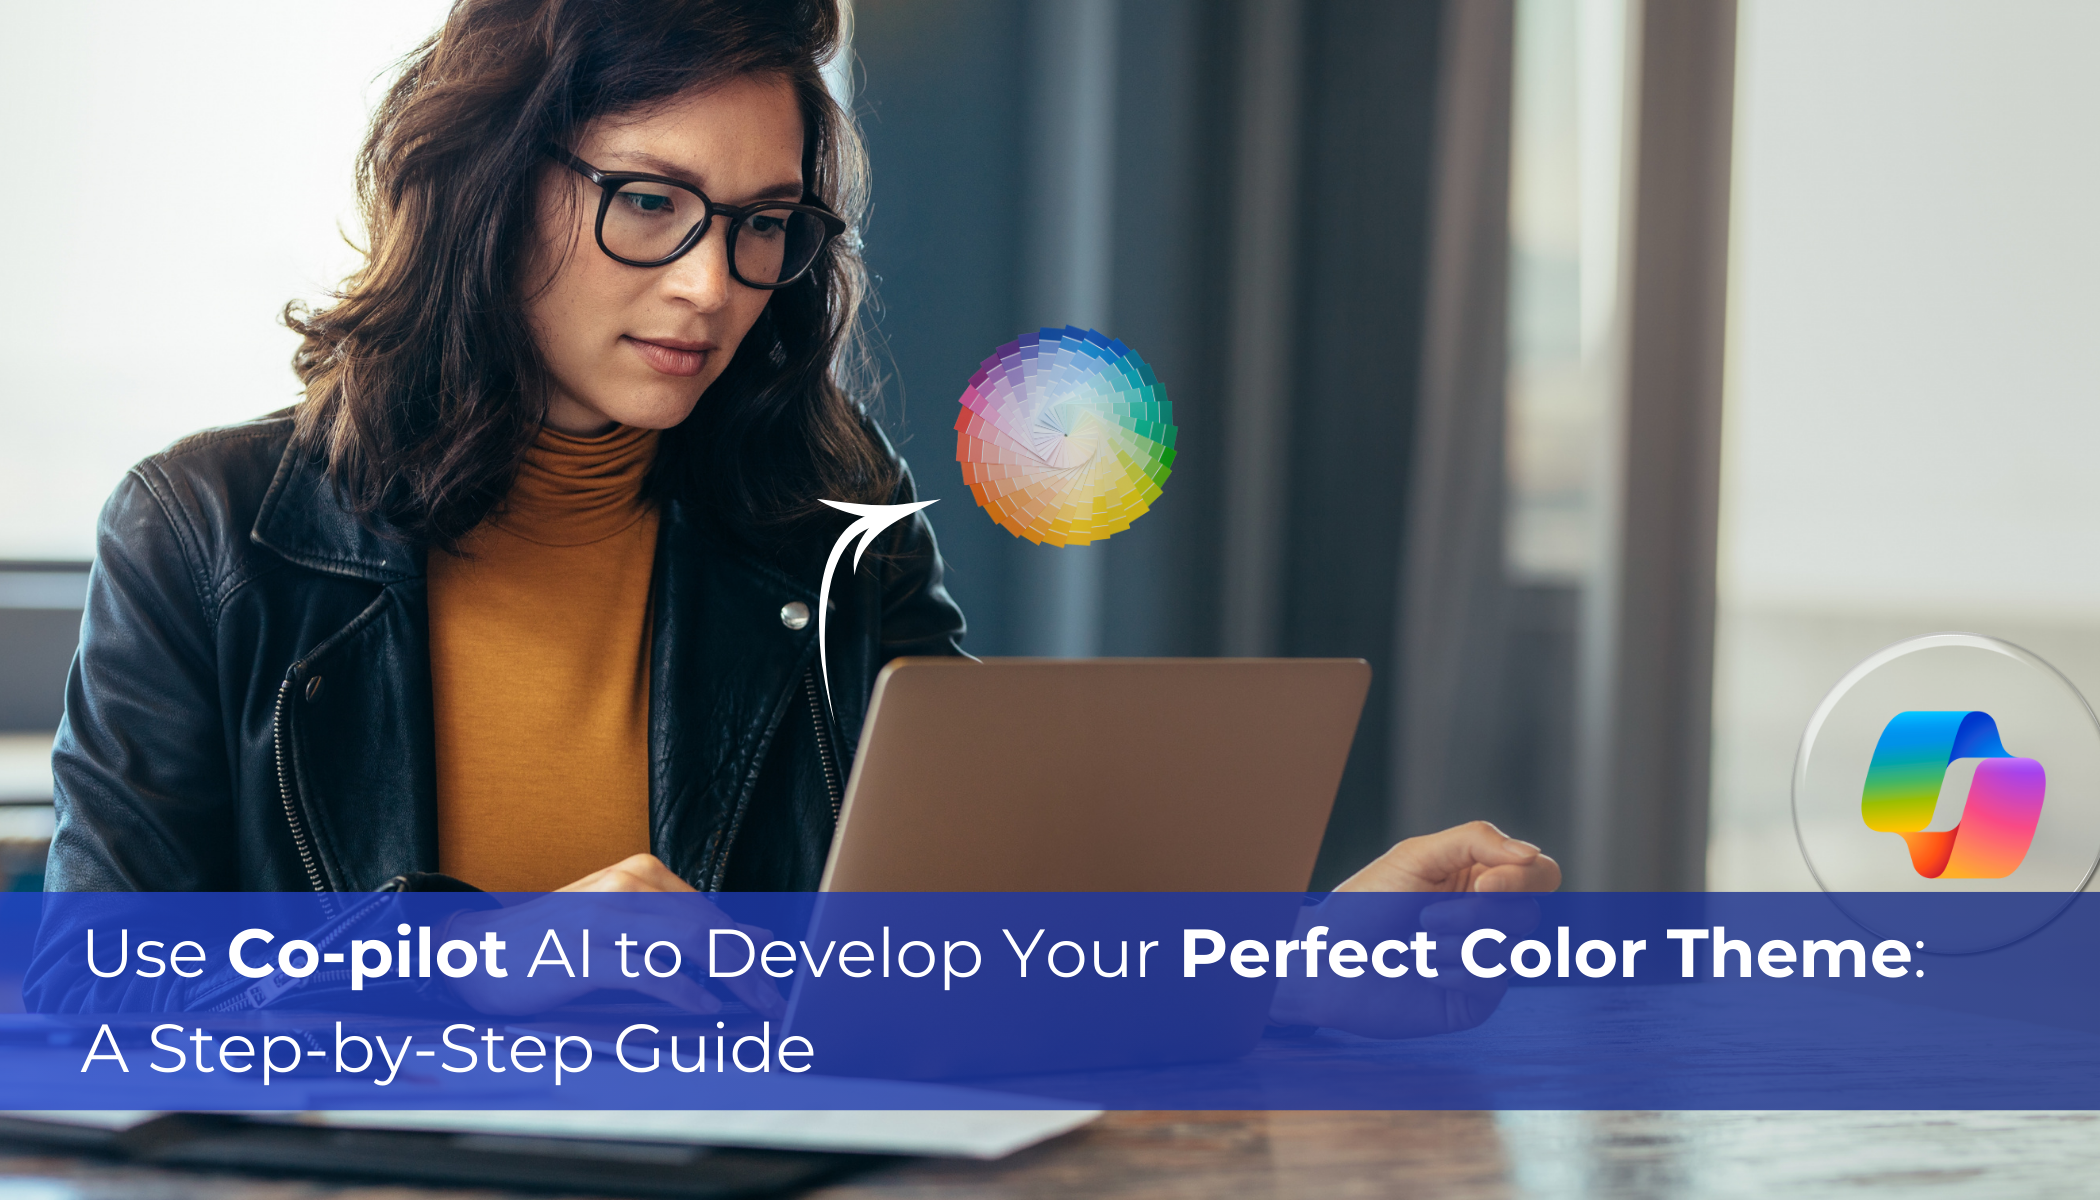 Use Co-pilot AI to Develop Your Perfect Color Theme